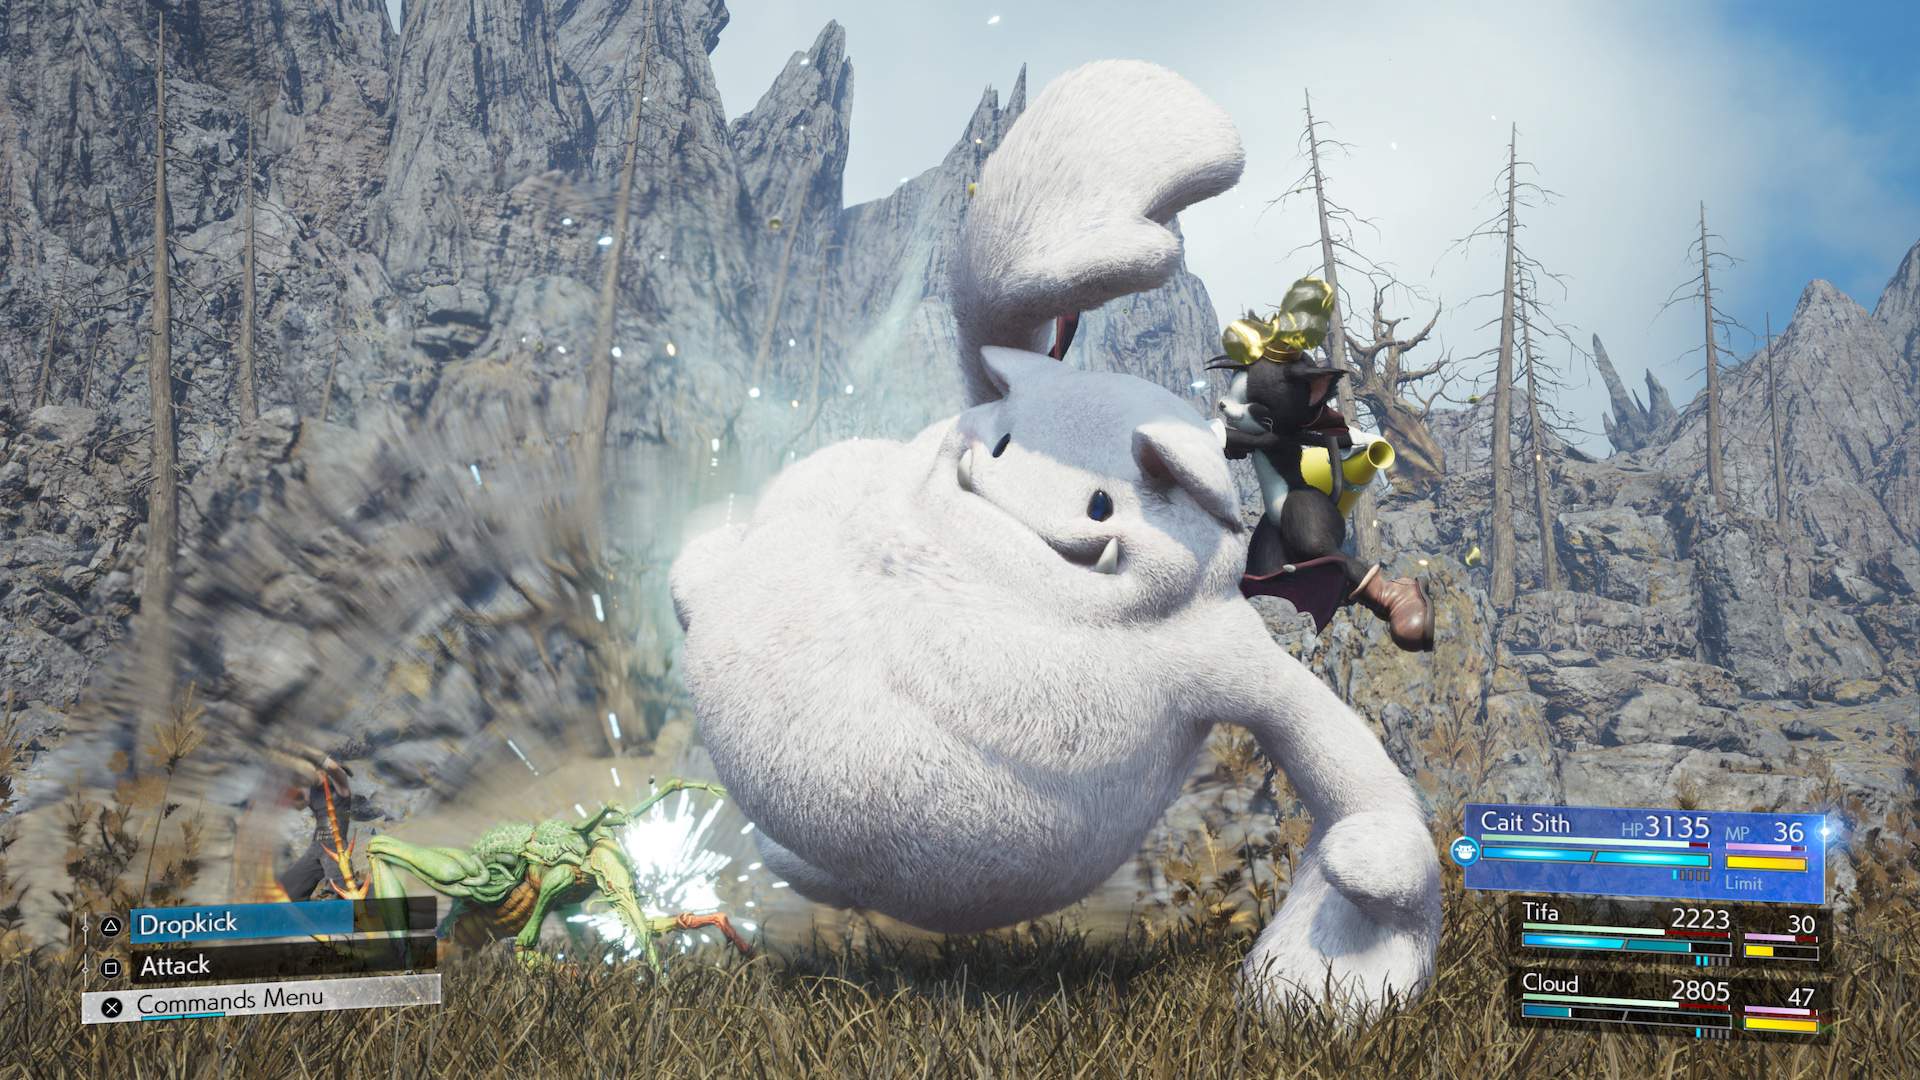 Cait Sith and moogle in combat